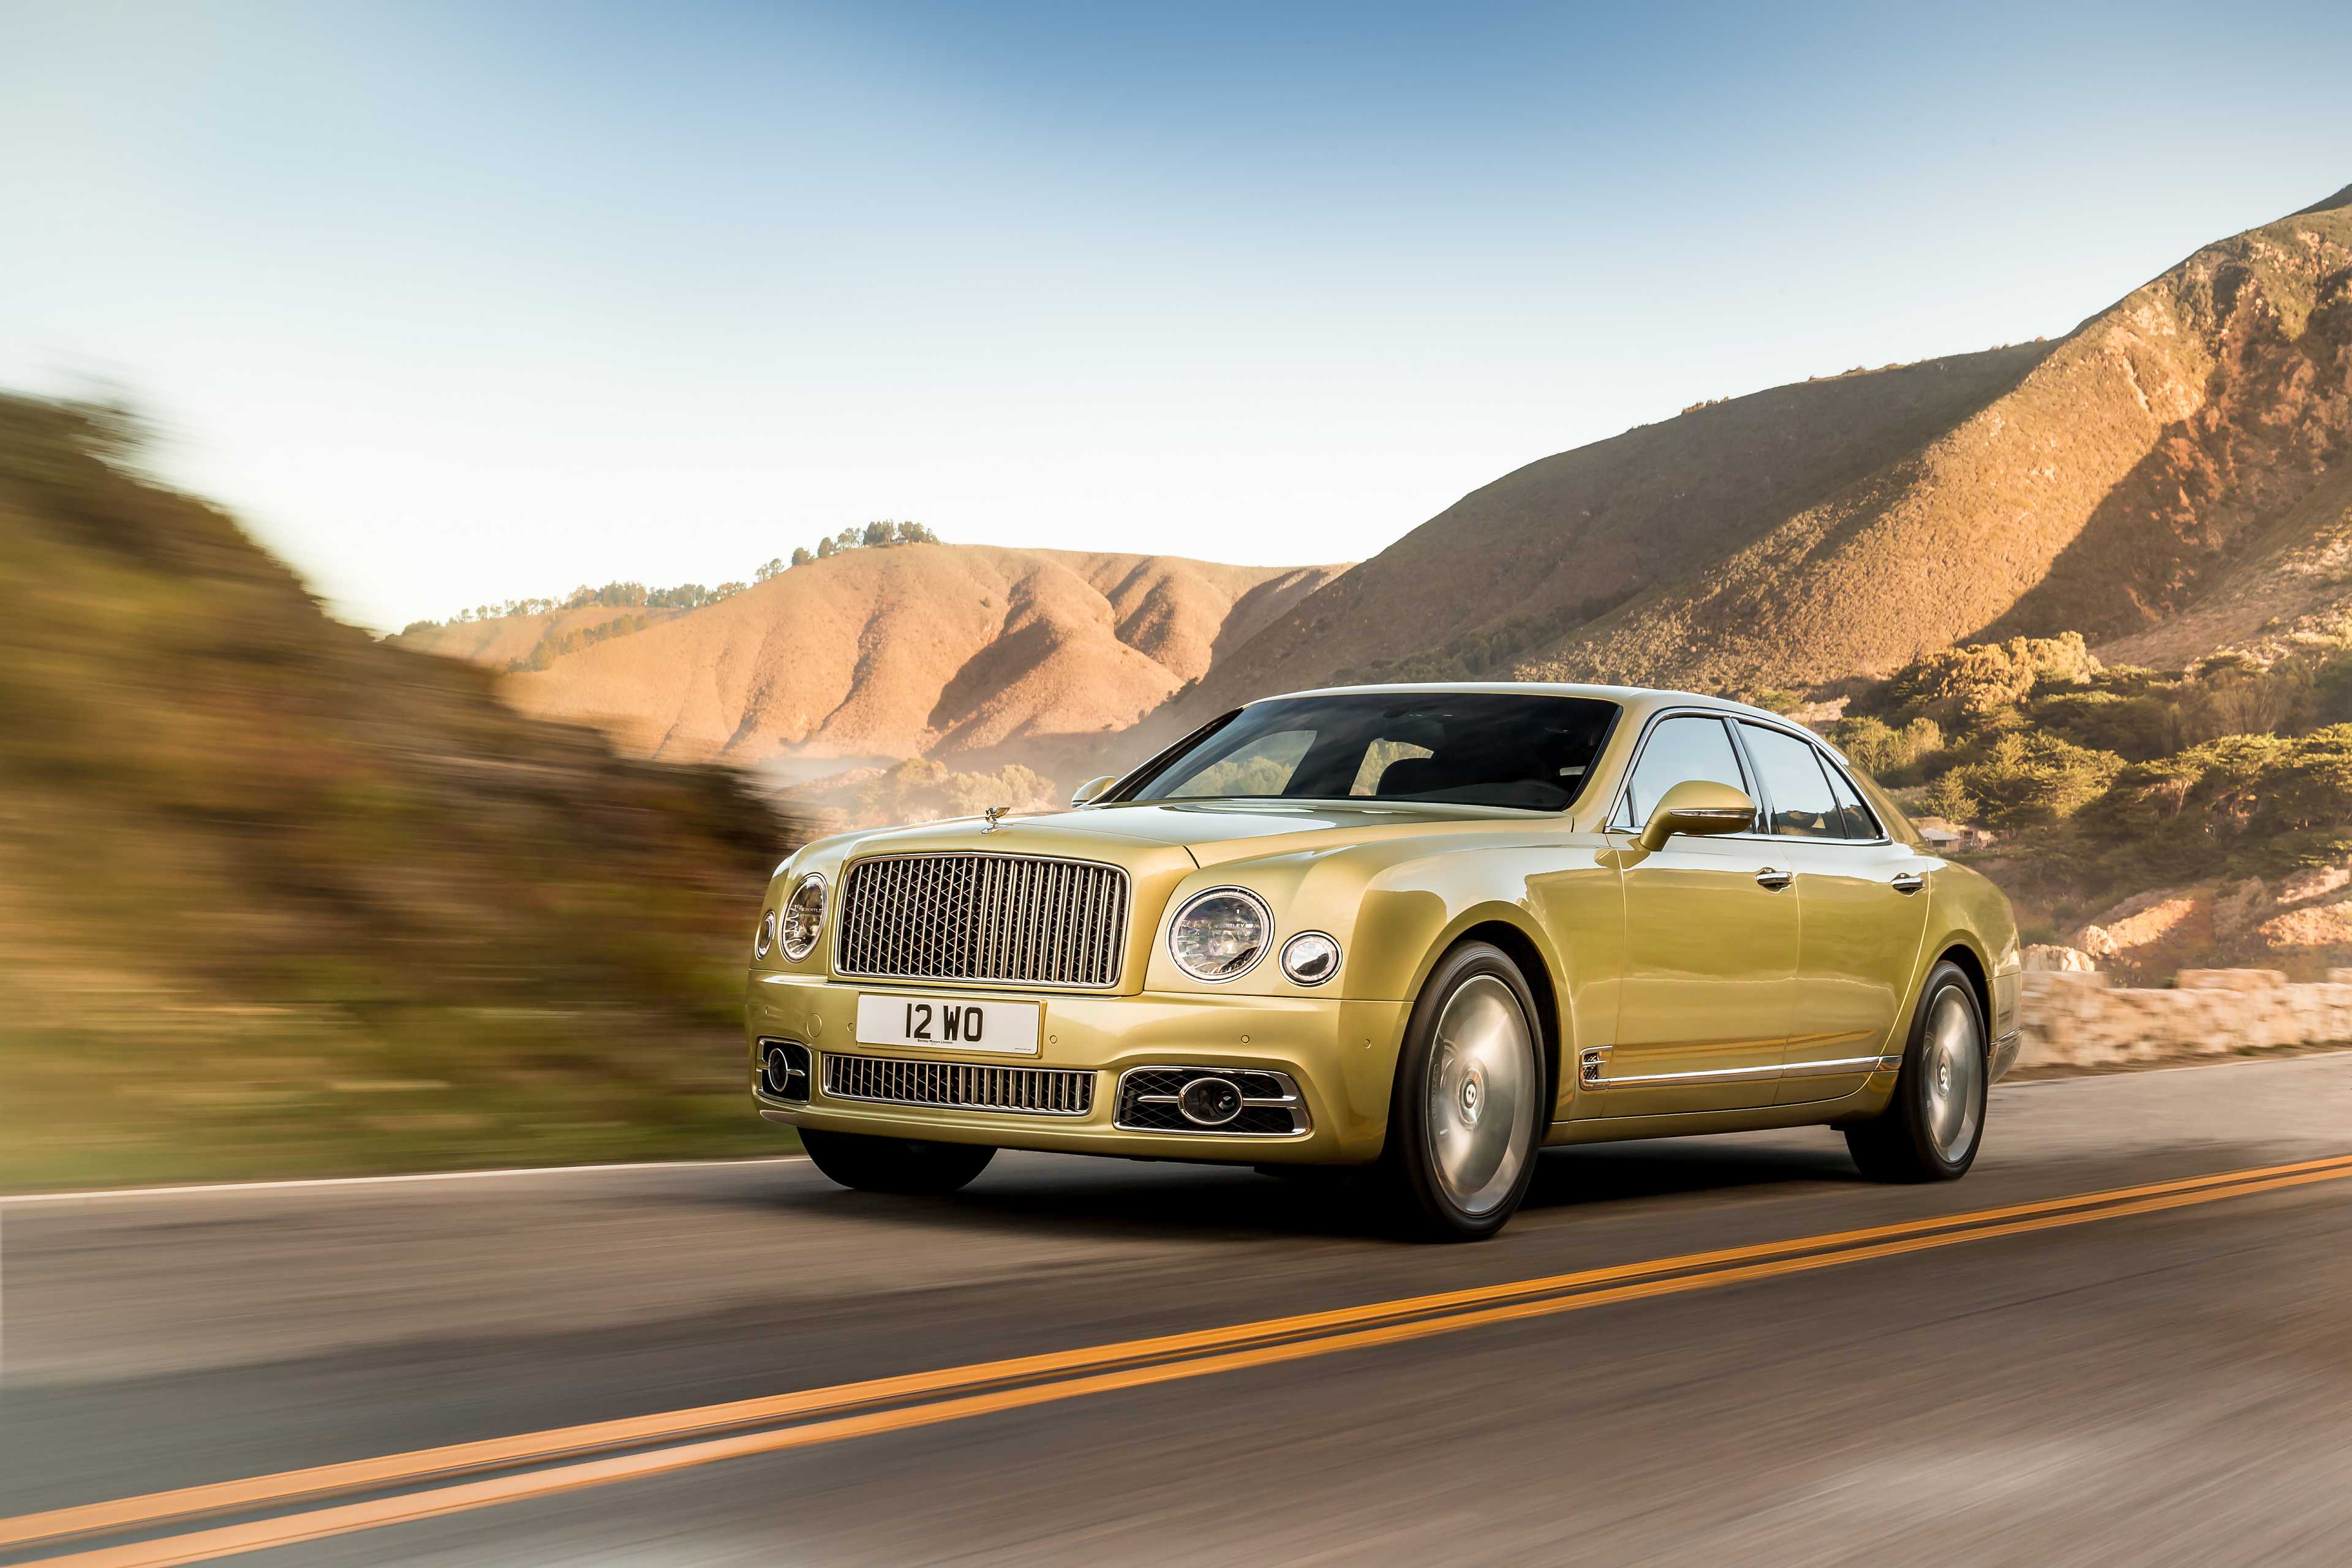 High Quality Tuning Files Bentley Mulsanne 6.75 V8 speed 537hp